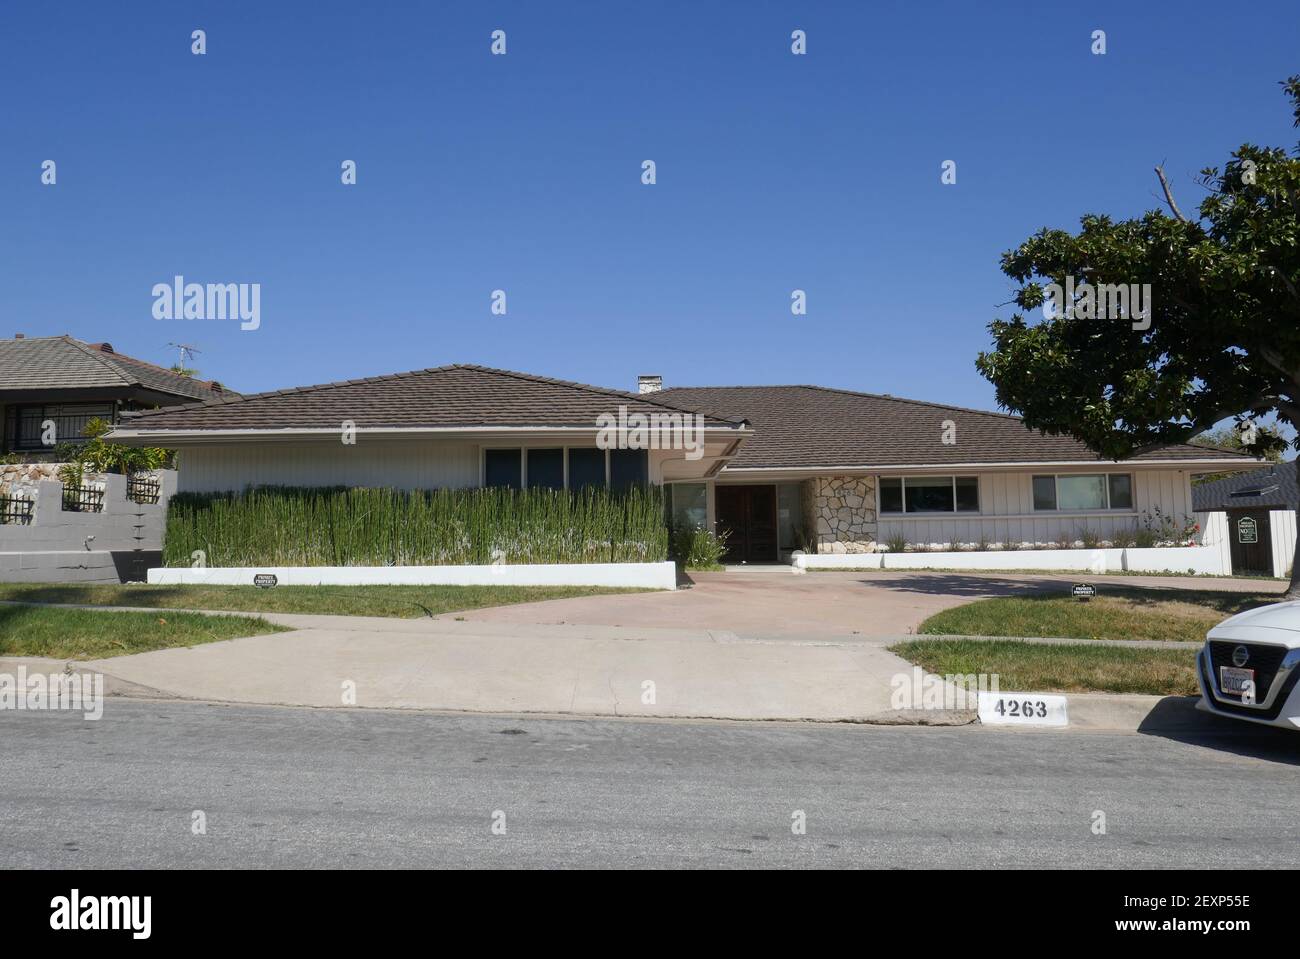 Los Angeles, California, USA 4th March 2021 A general view of atmosphere of  Singer Tina Turner and Ike Turner's former home/house at 4263 Olympiad  Drive in View Park on March 4, 2021